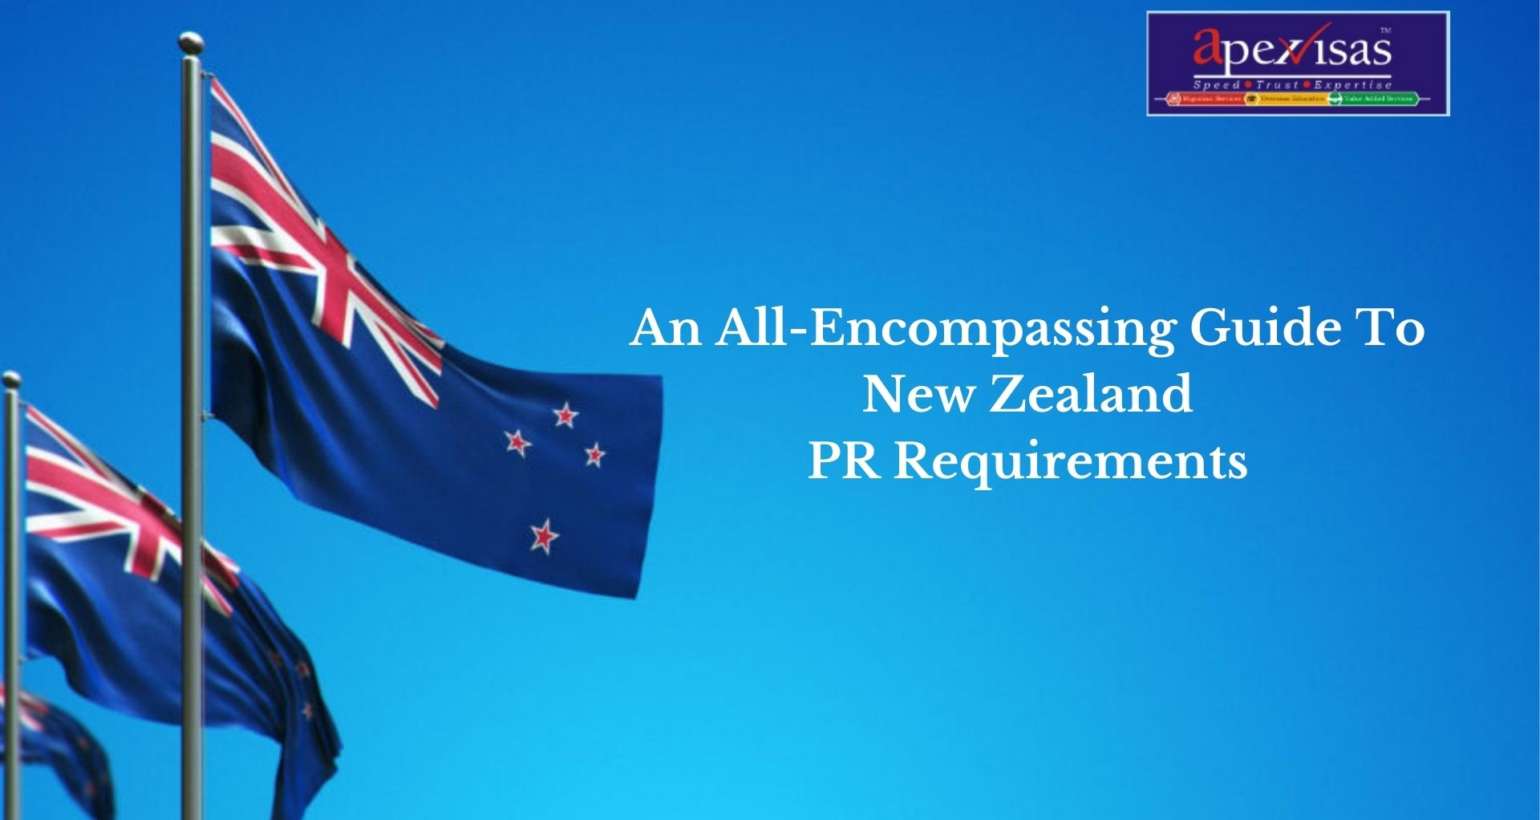 An All-Encompassing Guide To New Zealand PR Requirements